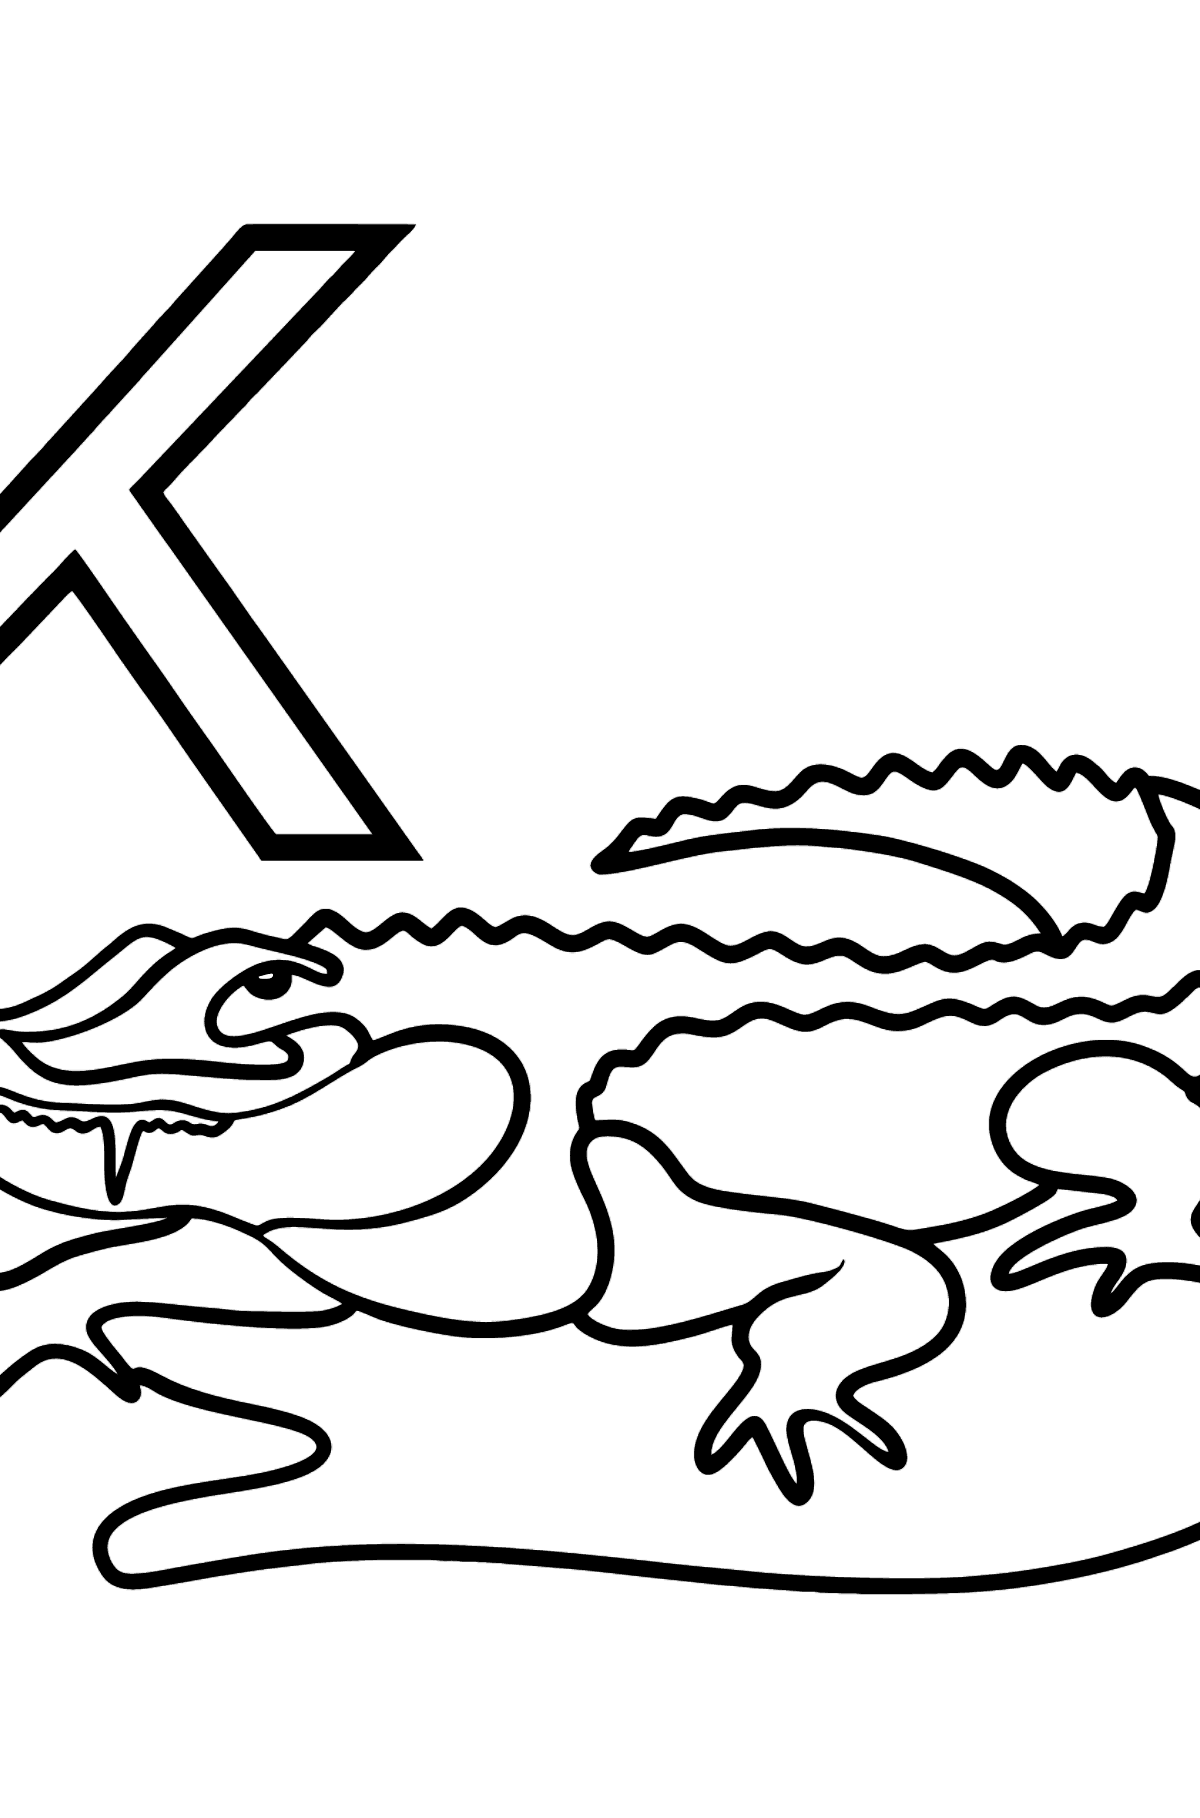 German Letter K coloring pages - KROKODIL - Coloring Pages for Kids